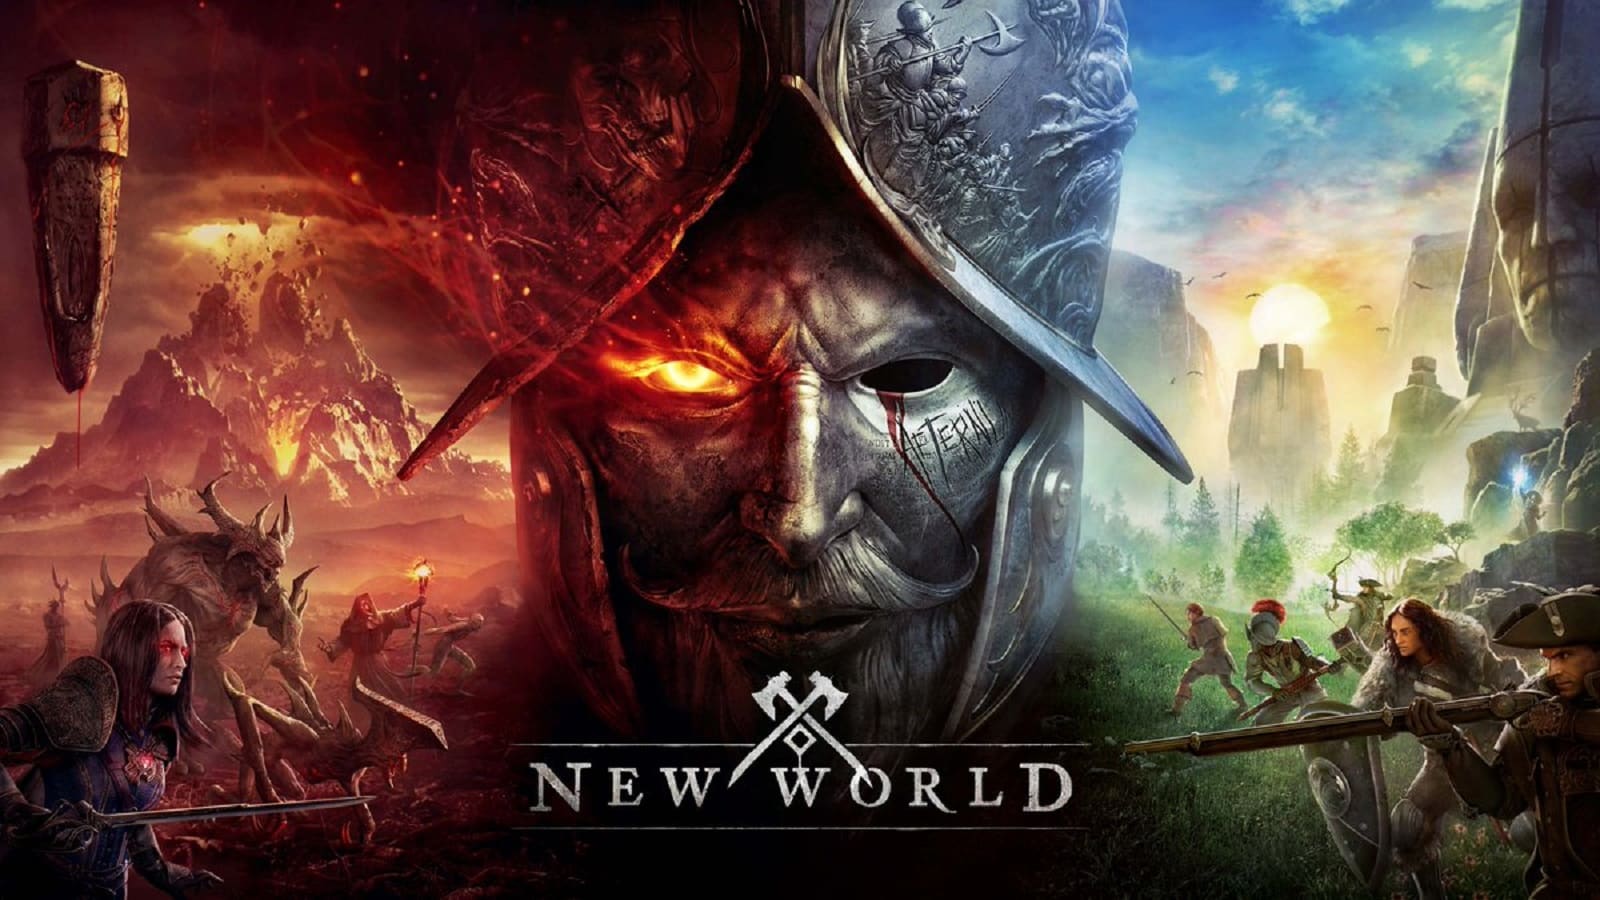 New World promotional image showing a battlefield